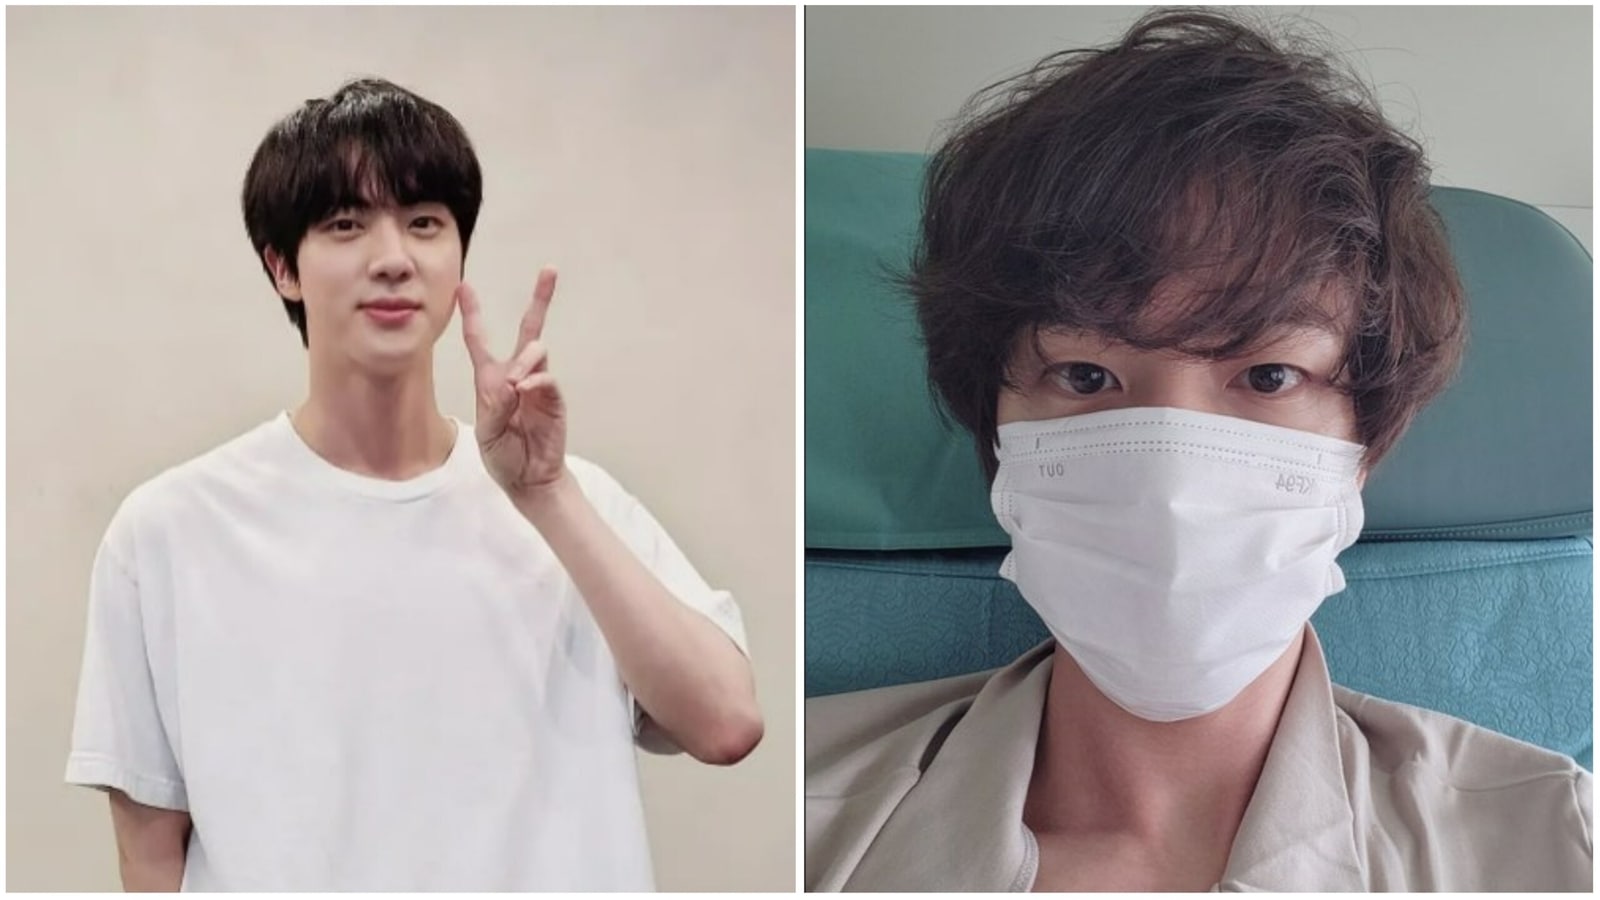 Jin Teases Potential Solo Variety Show During Break From BTS